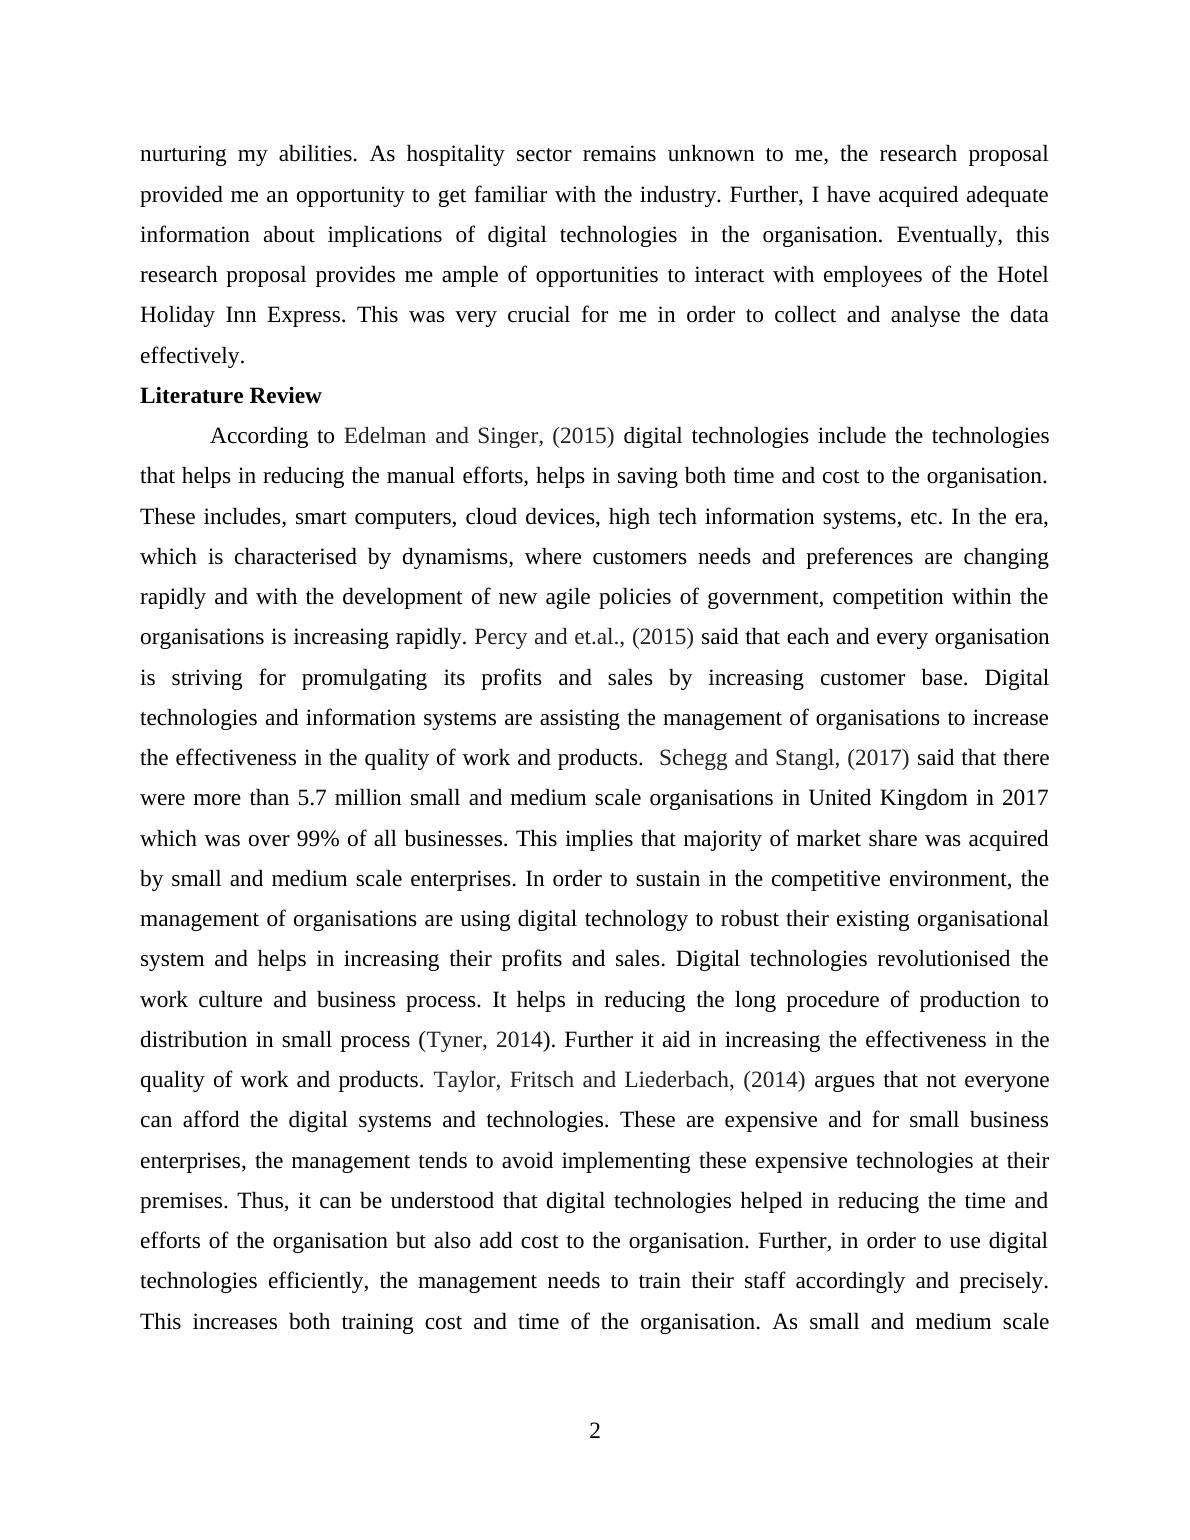 Research Proposal Assignment: Implications of Digital Technologies_4